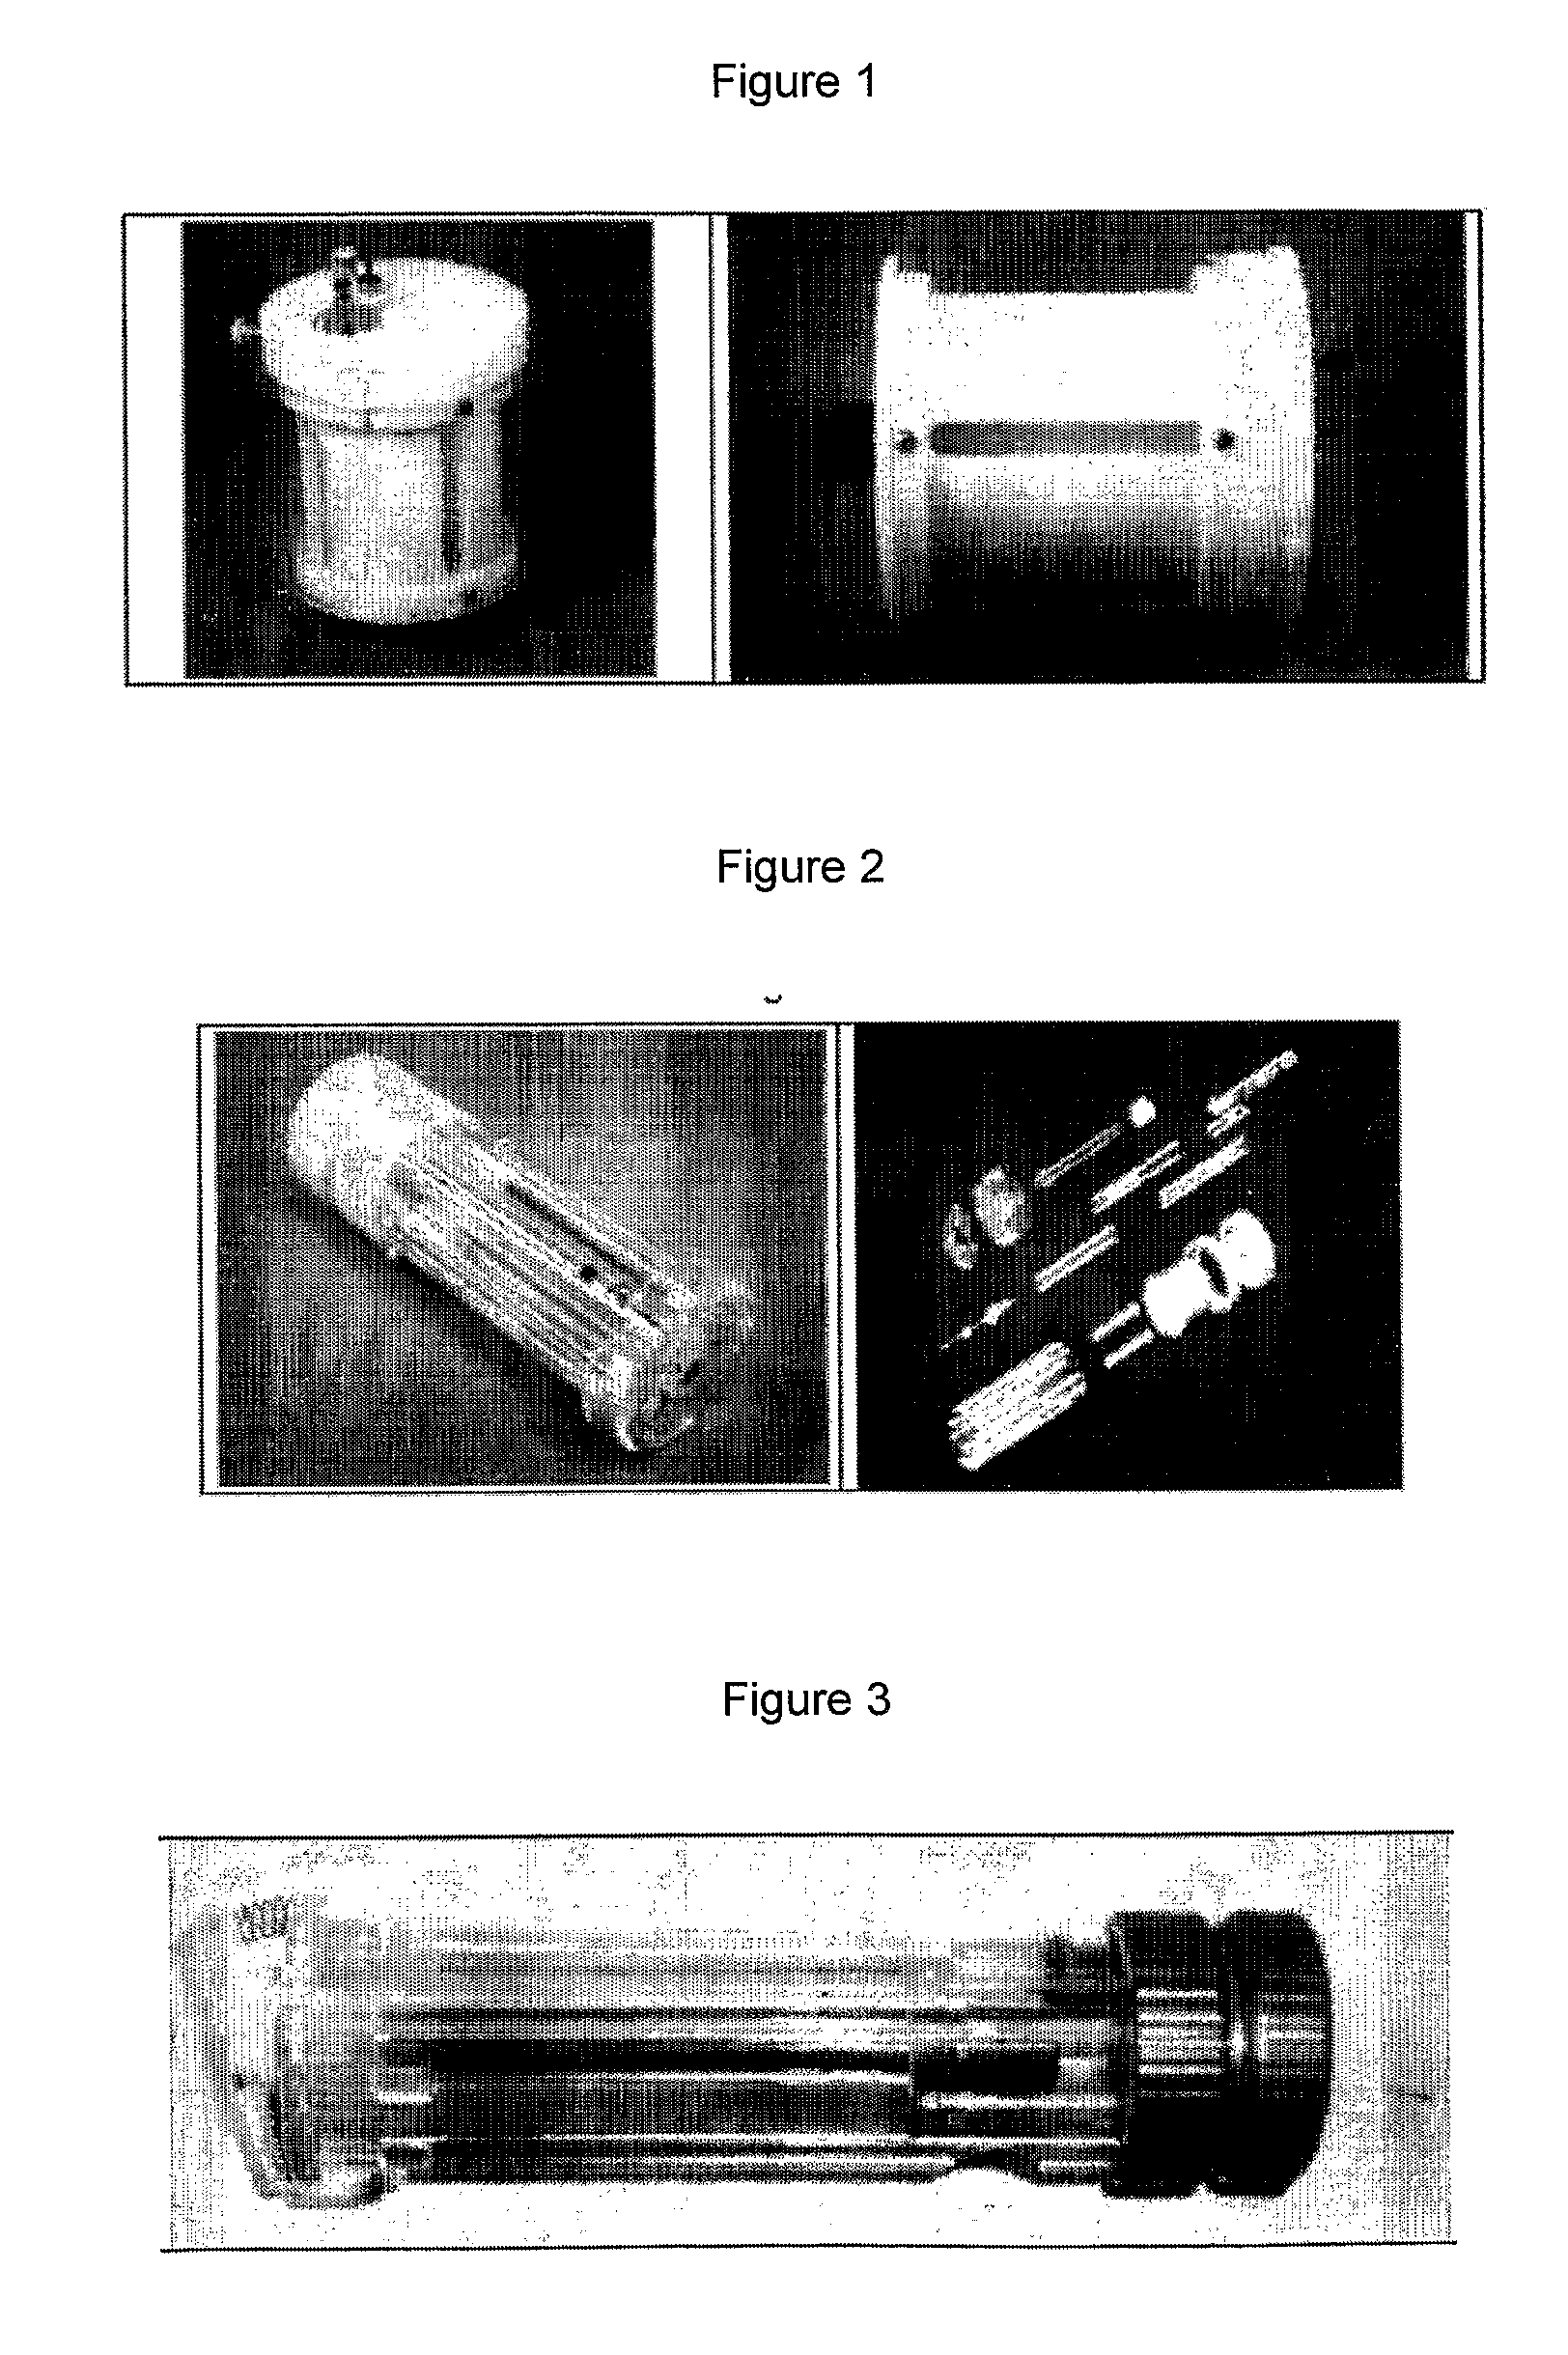 Blood collector device and blood analysis procedure